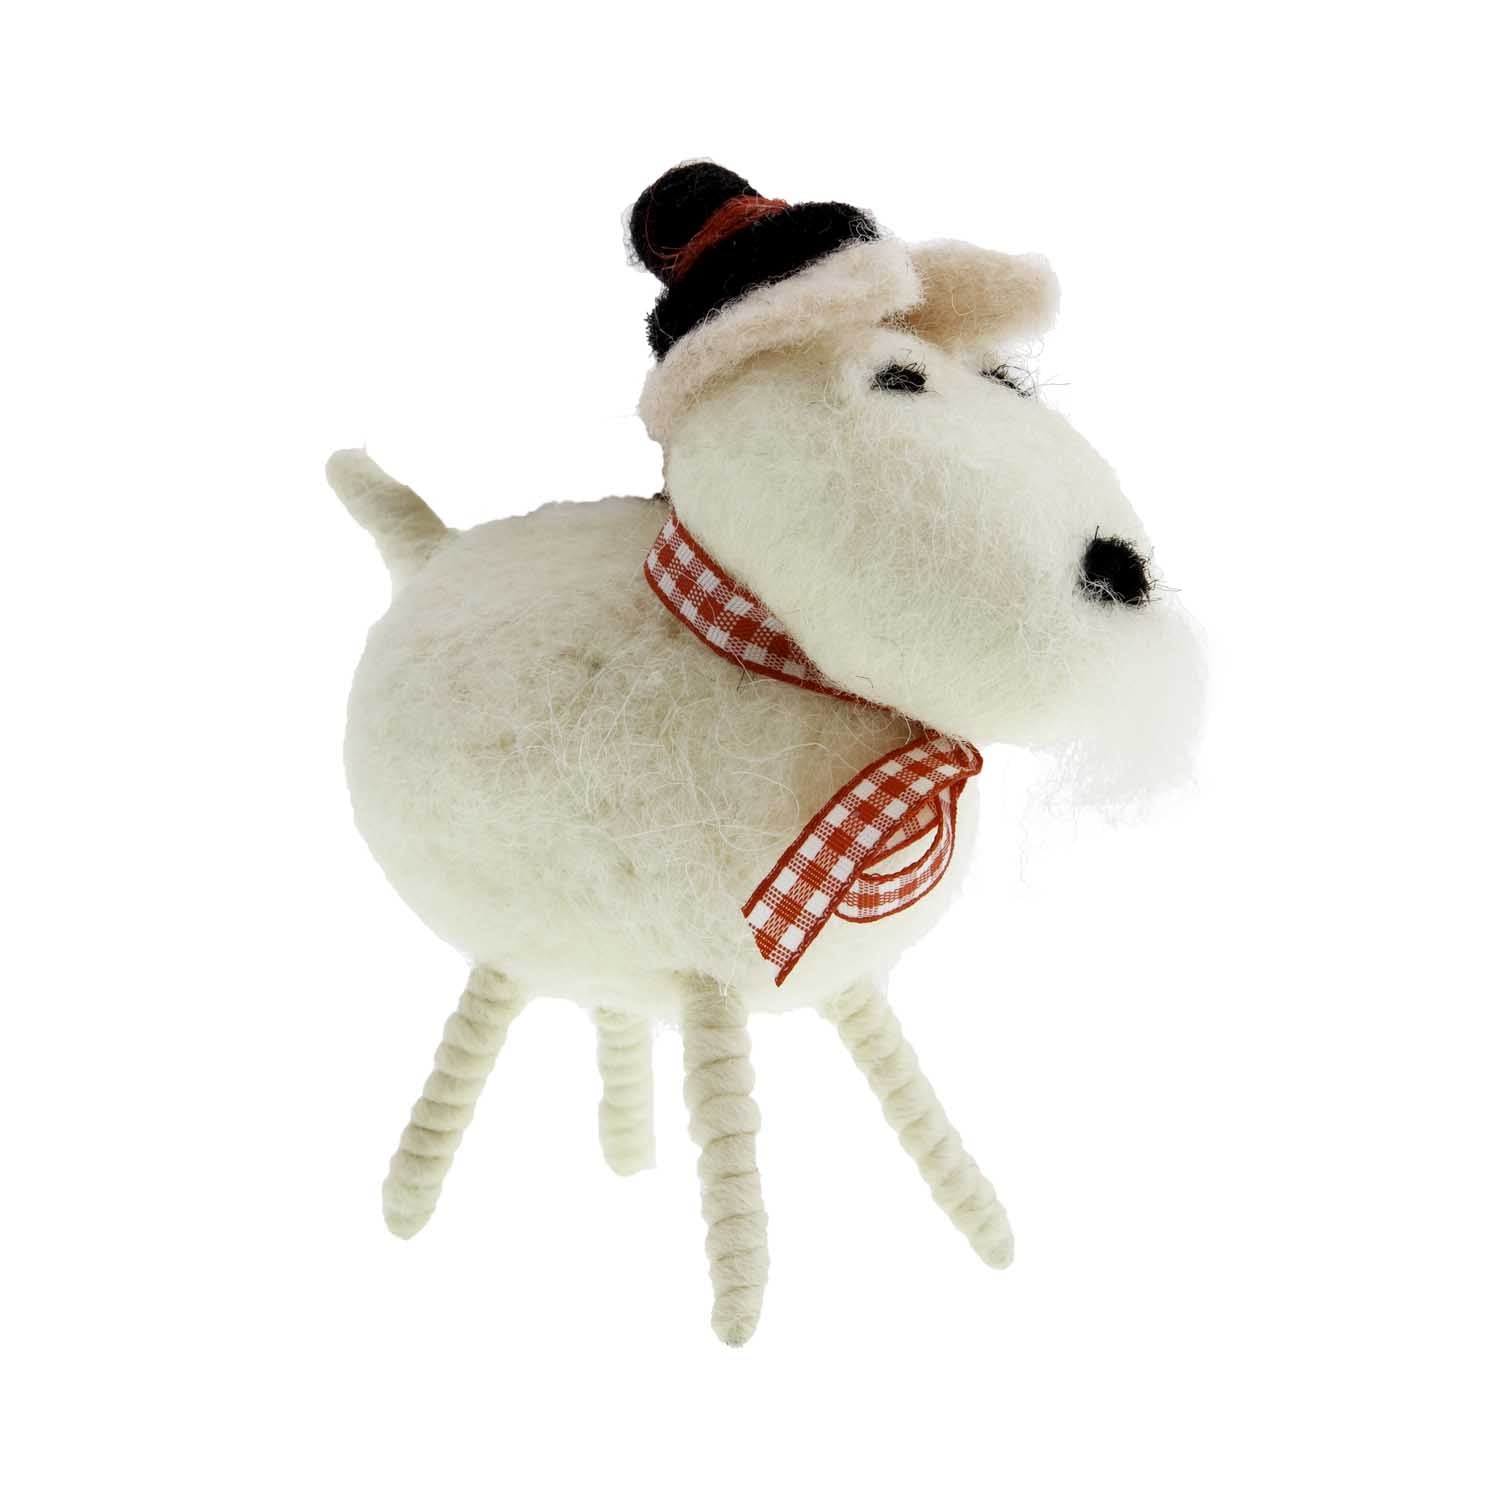 Dog Krazy Gifts - Woollen White Dog Ornament, Part Of The Christmas collection available from DogKrazyGifts.co.uk